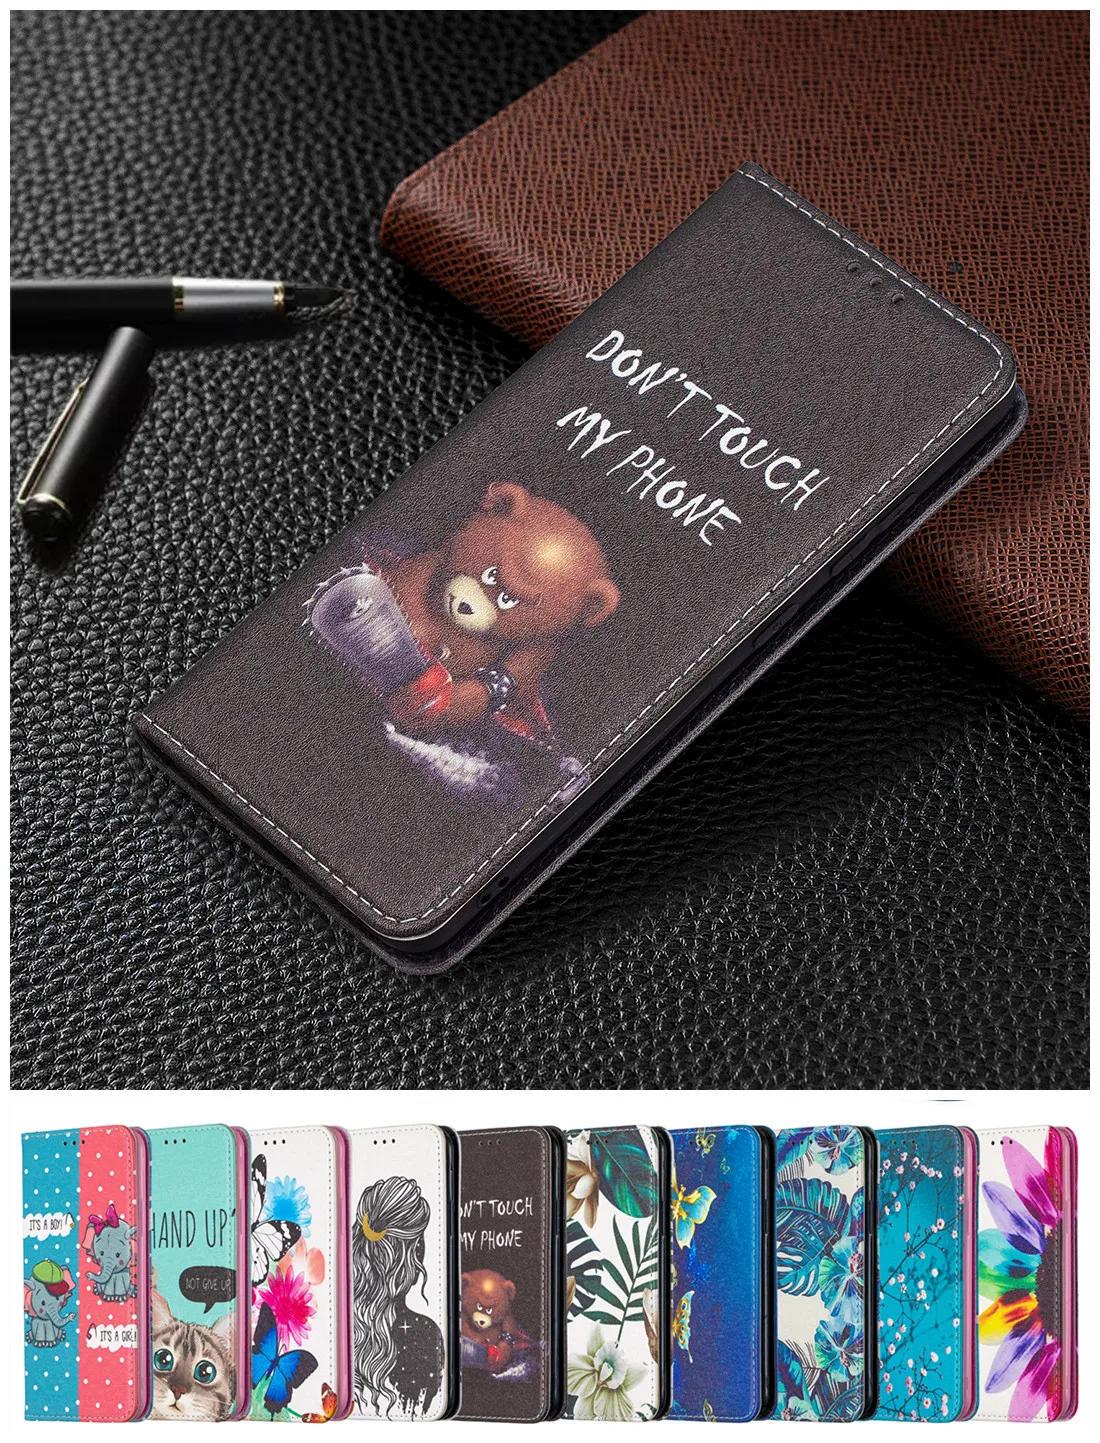 

Painted Leather Case Wallet for Samsung Galaxy A12 A42 5G A21S A81 A91 S10 Note 10 Lite A11 A31 A41 Flip Cover Fashion Fundas